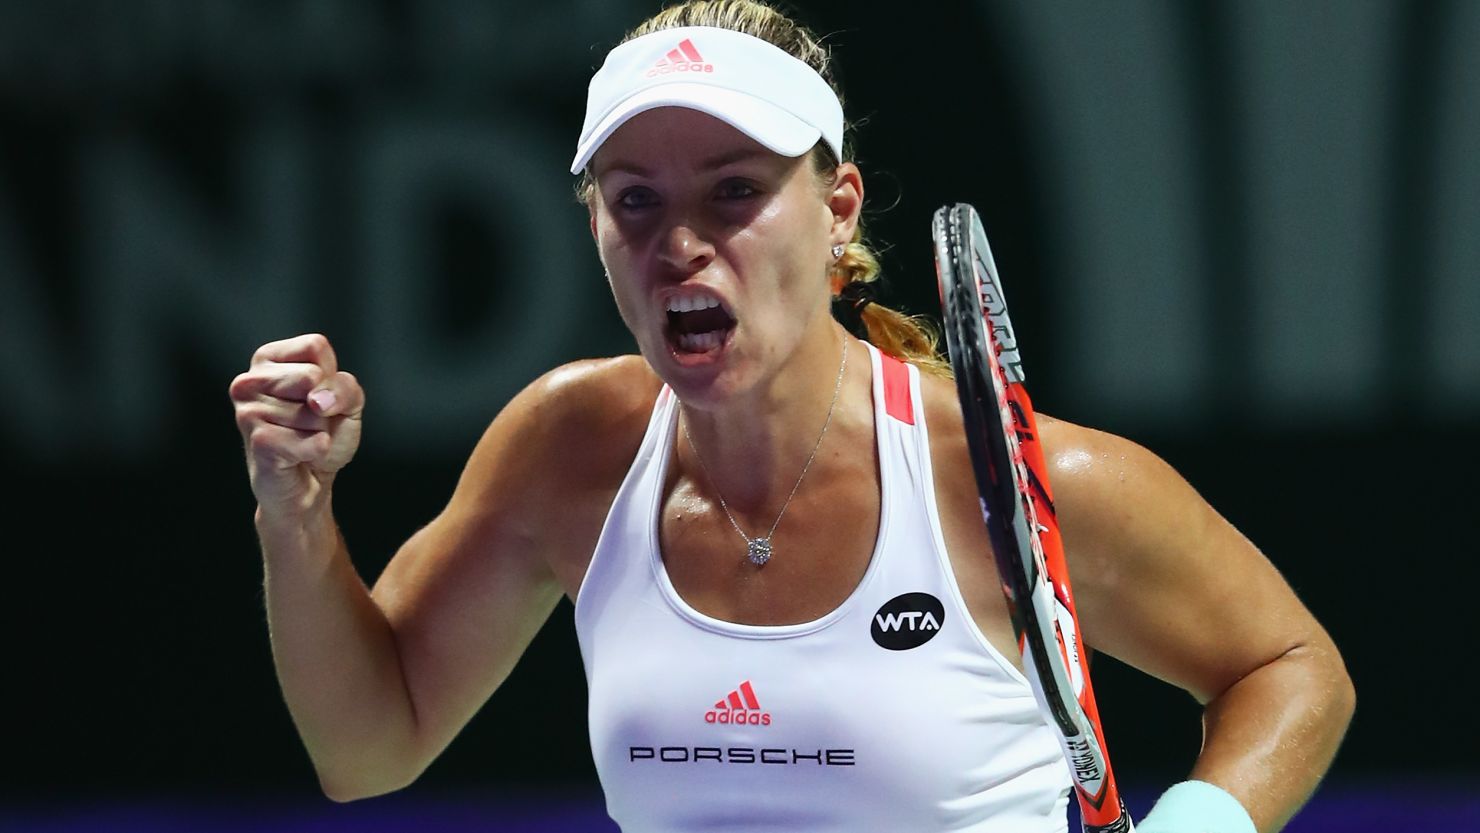 Angelique Kerber was relieved to get past Dominika Cibulkova in the Red Group opener.